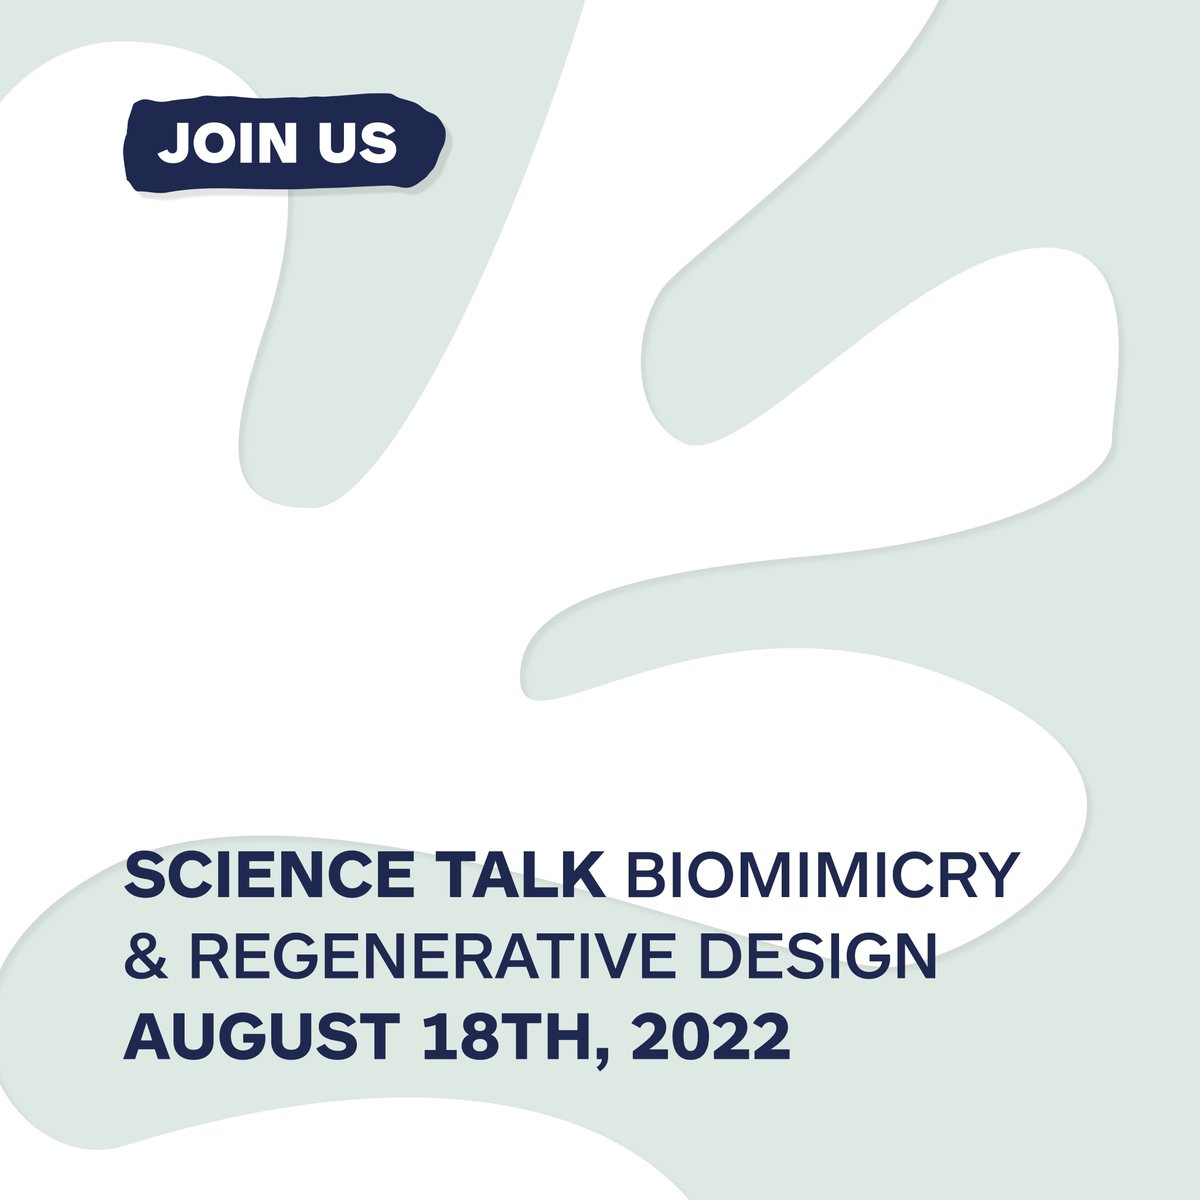 JOIN US for the next Science Talks: Biomimicry and Regenerative Design on August 18 - 3-4pm where Architect Michael Pawlyn will give his perspective on the key differences between conventional sustainability and the emerging paradigm of regenerative design https://t.co/7W14Yt6Z7e